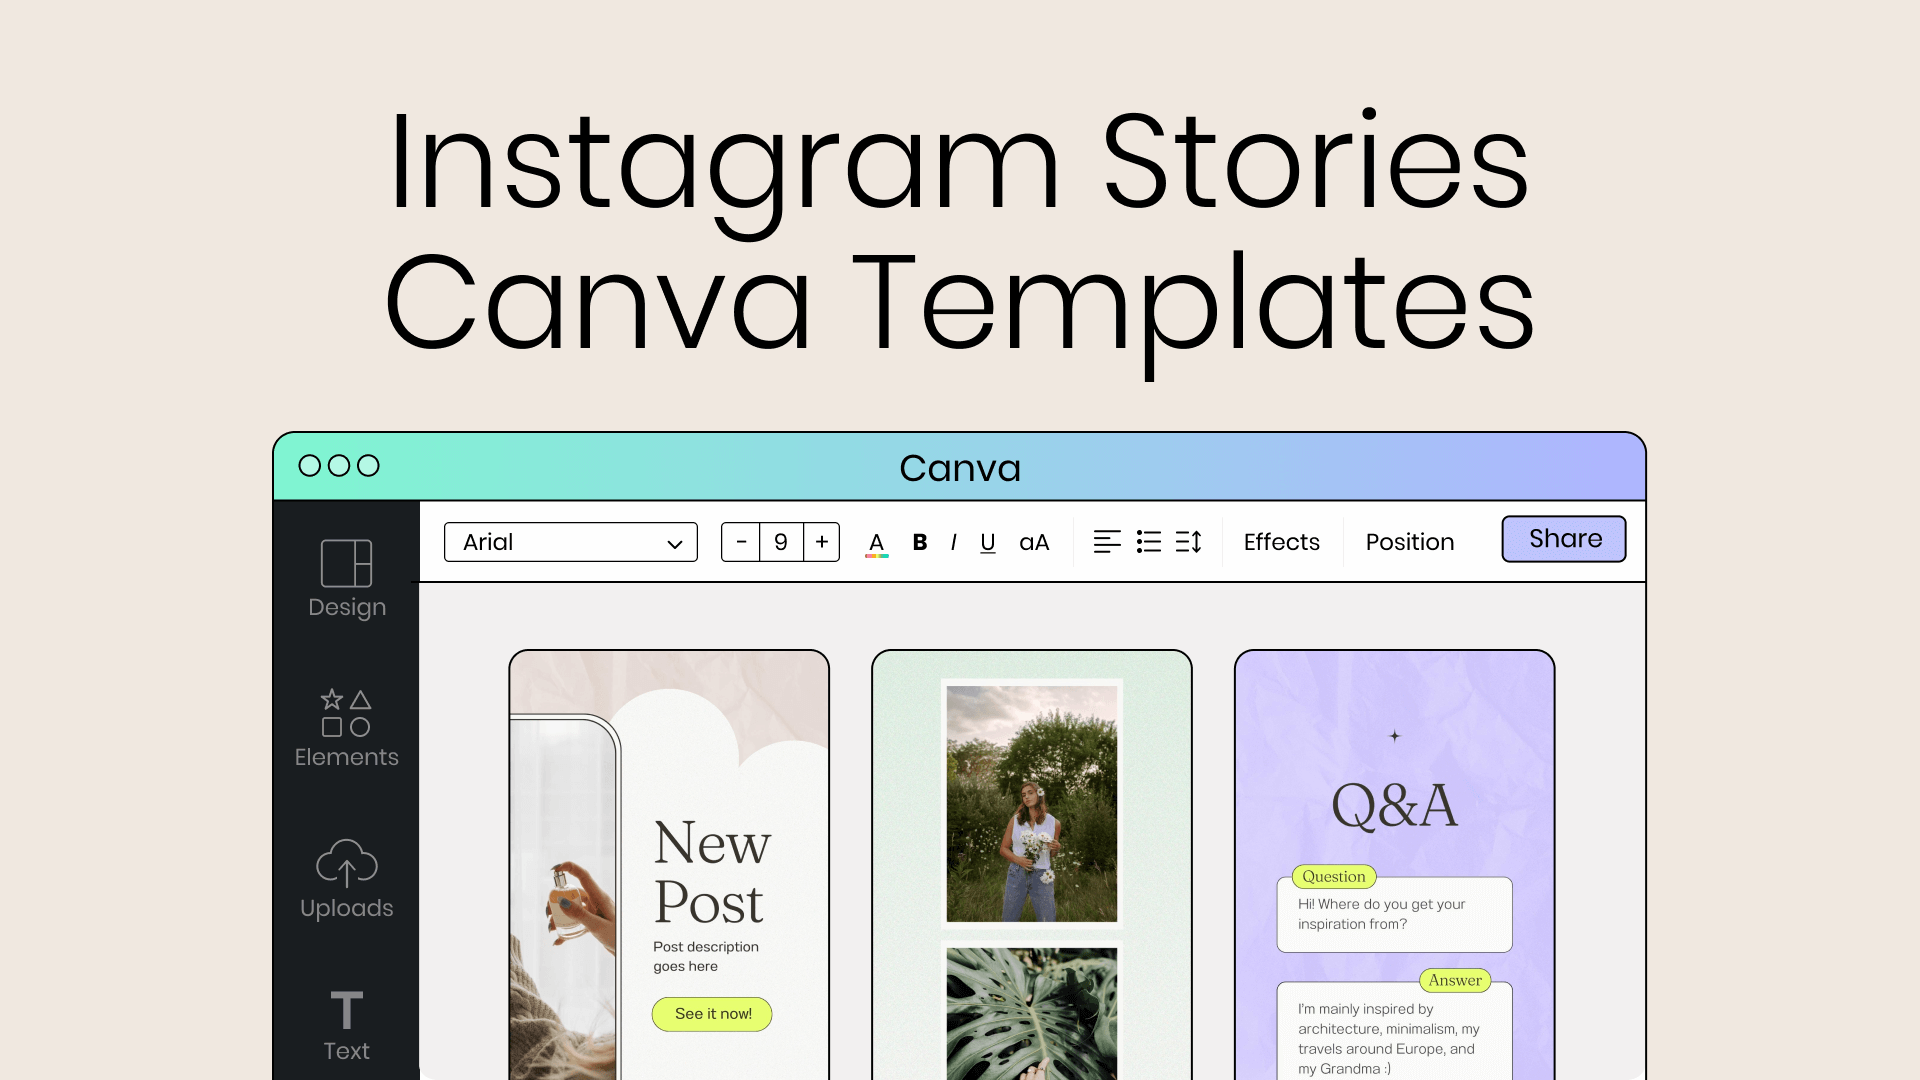 Thumbnail showing the title “Instagram Stories Canva templates” including image with titles like “new post” and “Q&A”